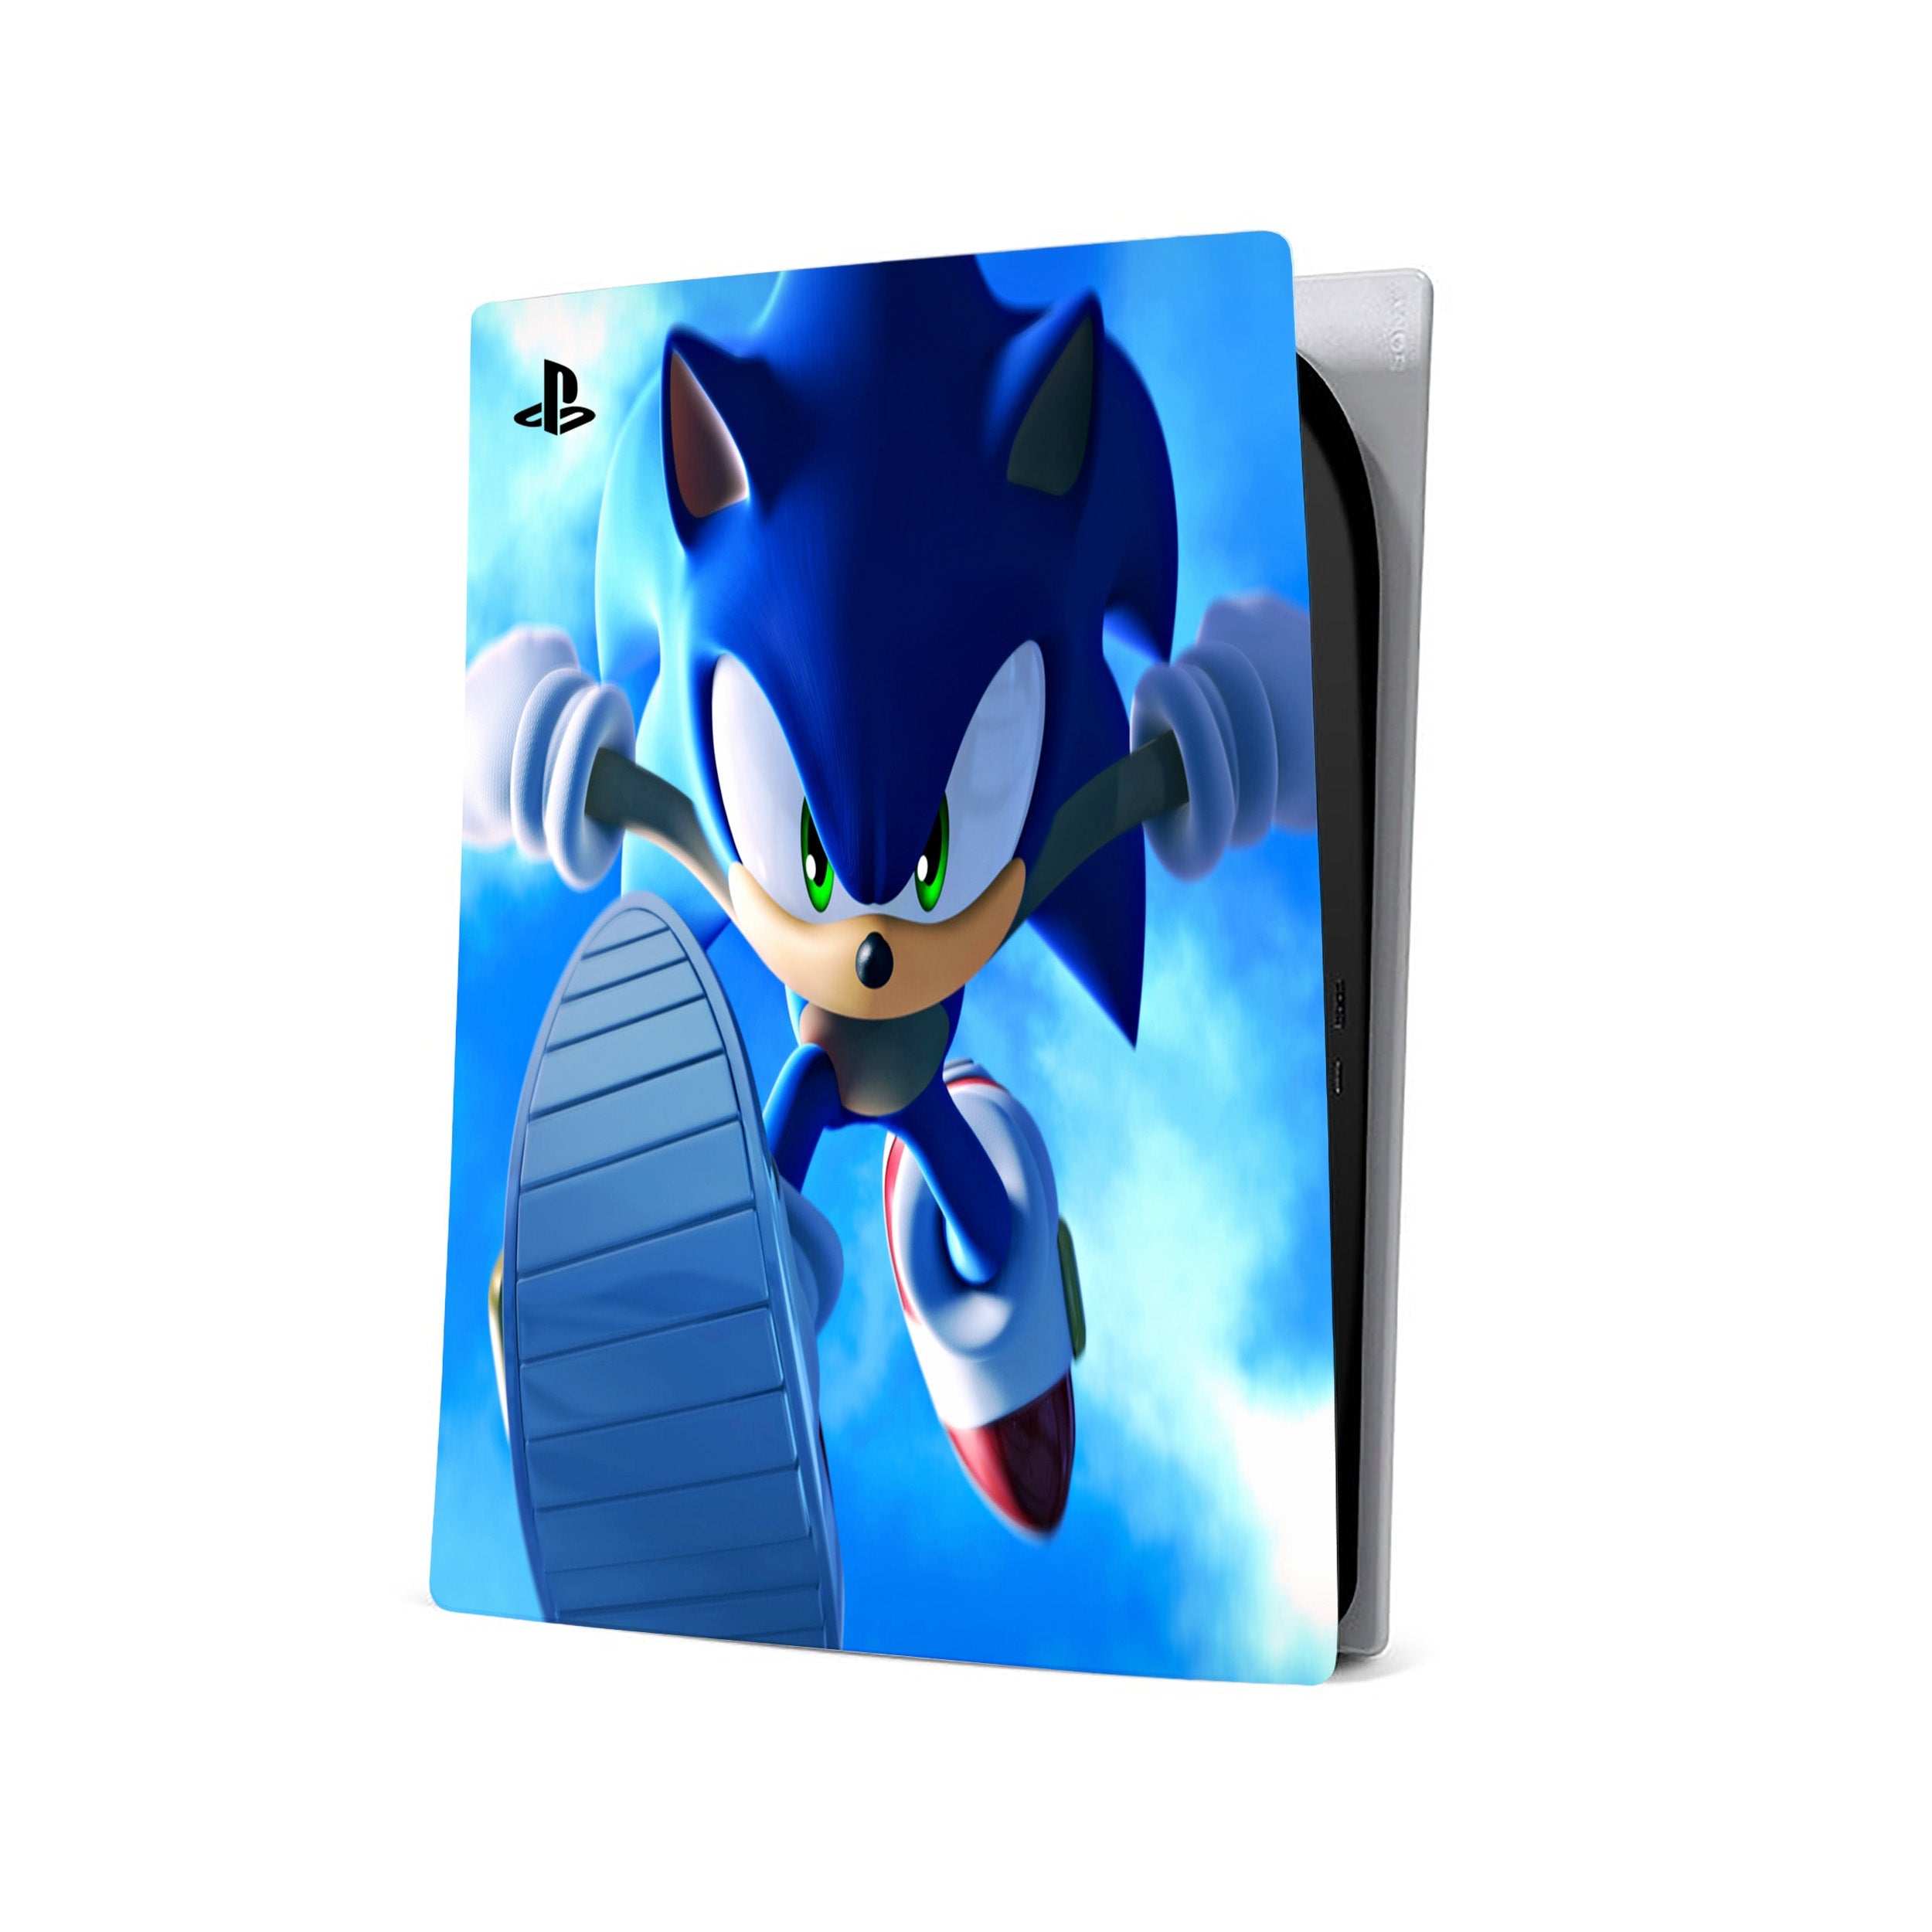 A video game skin featuring a Sonic The Hedgehog design for the PS5.